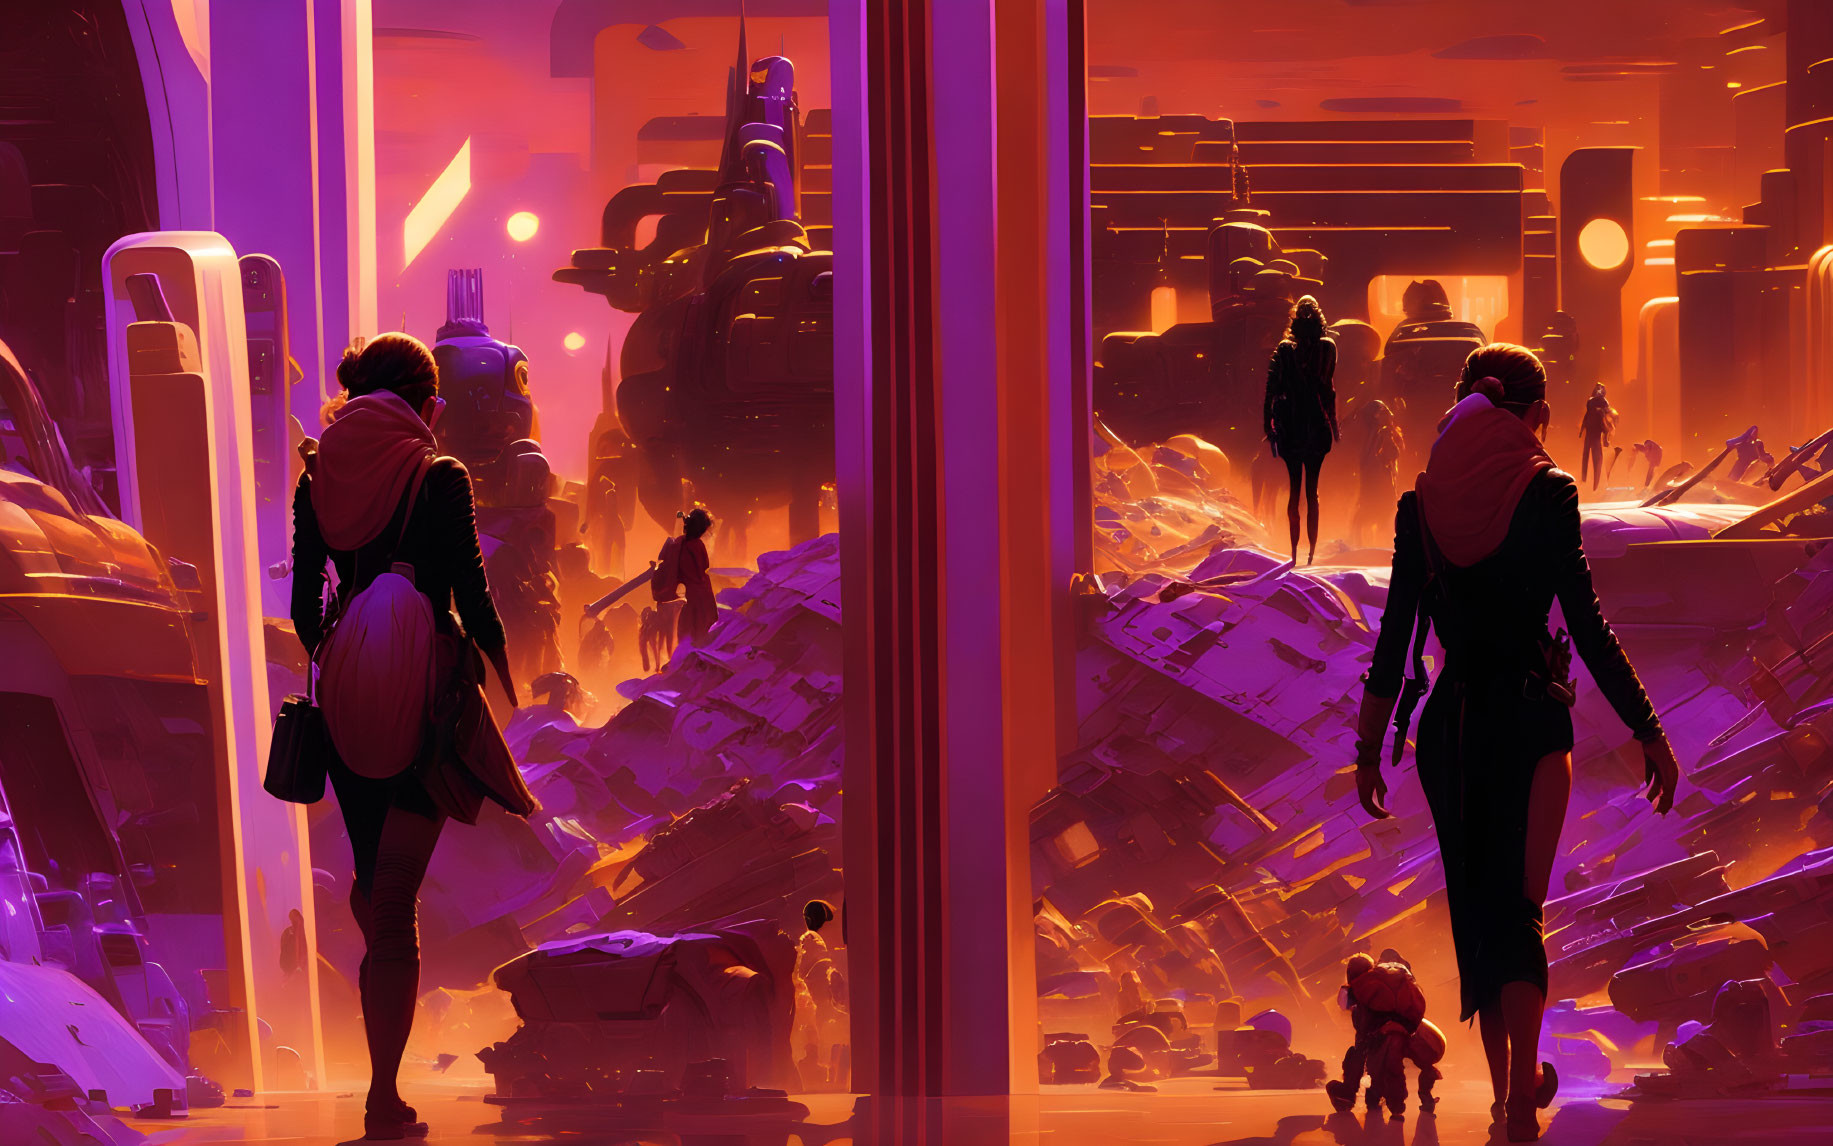 Futuristic cityscape with two individuals, a small robot, and sunset colors